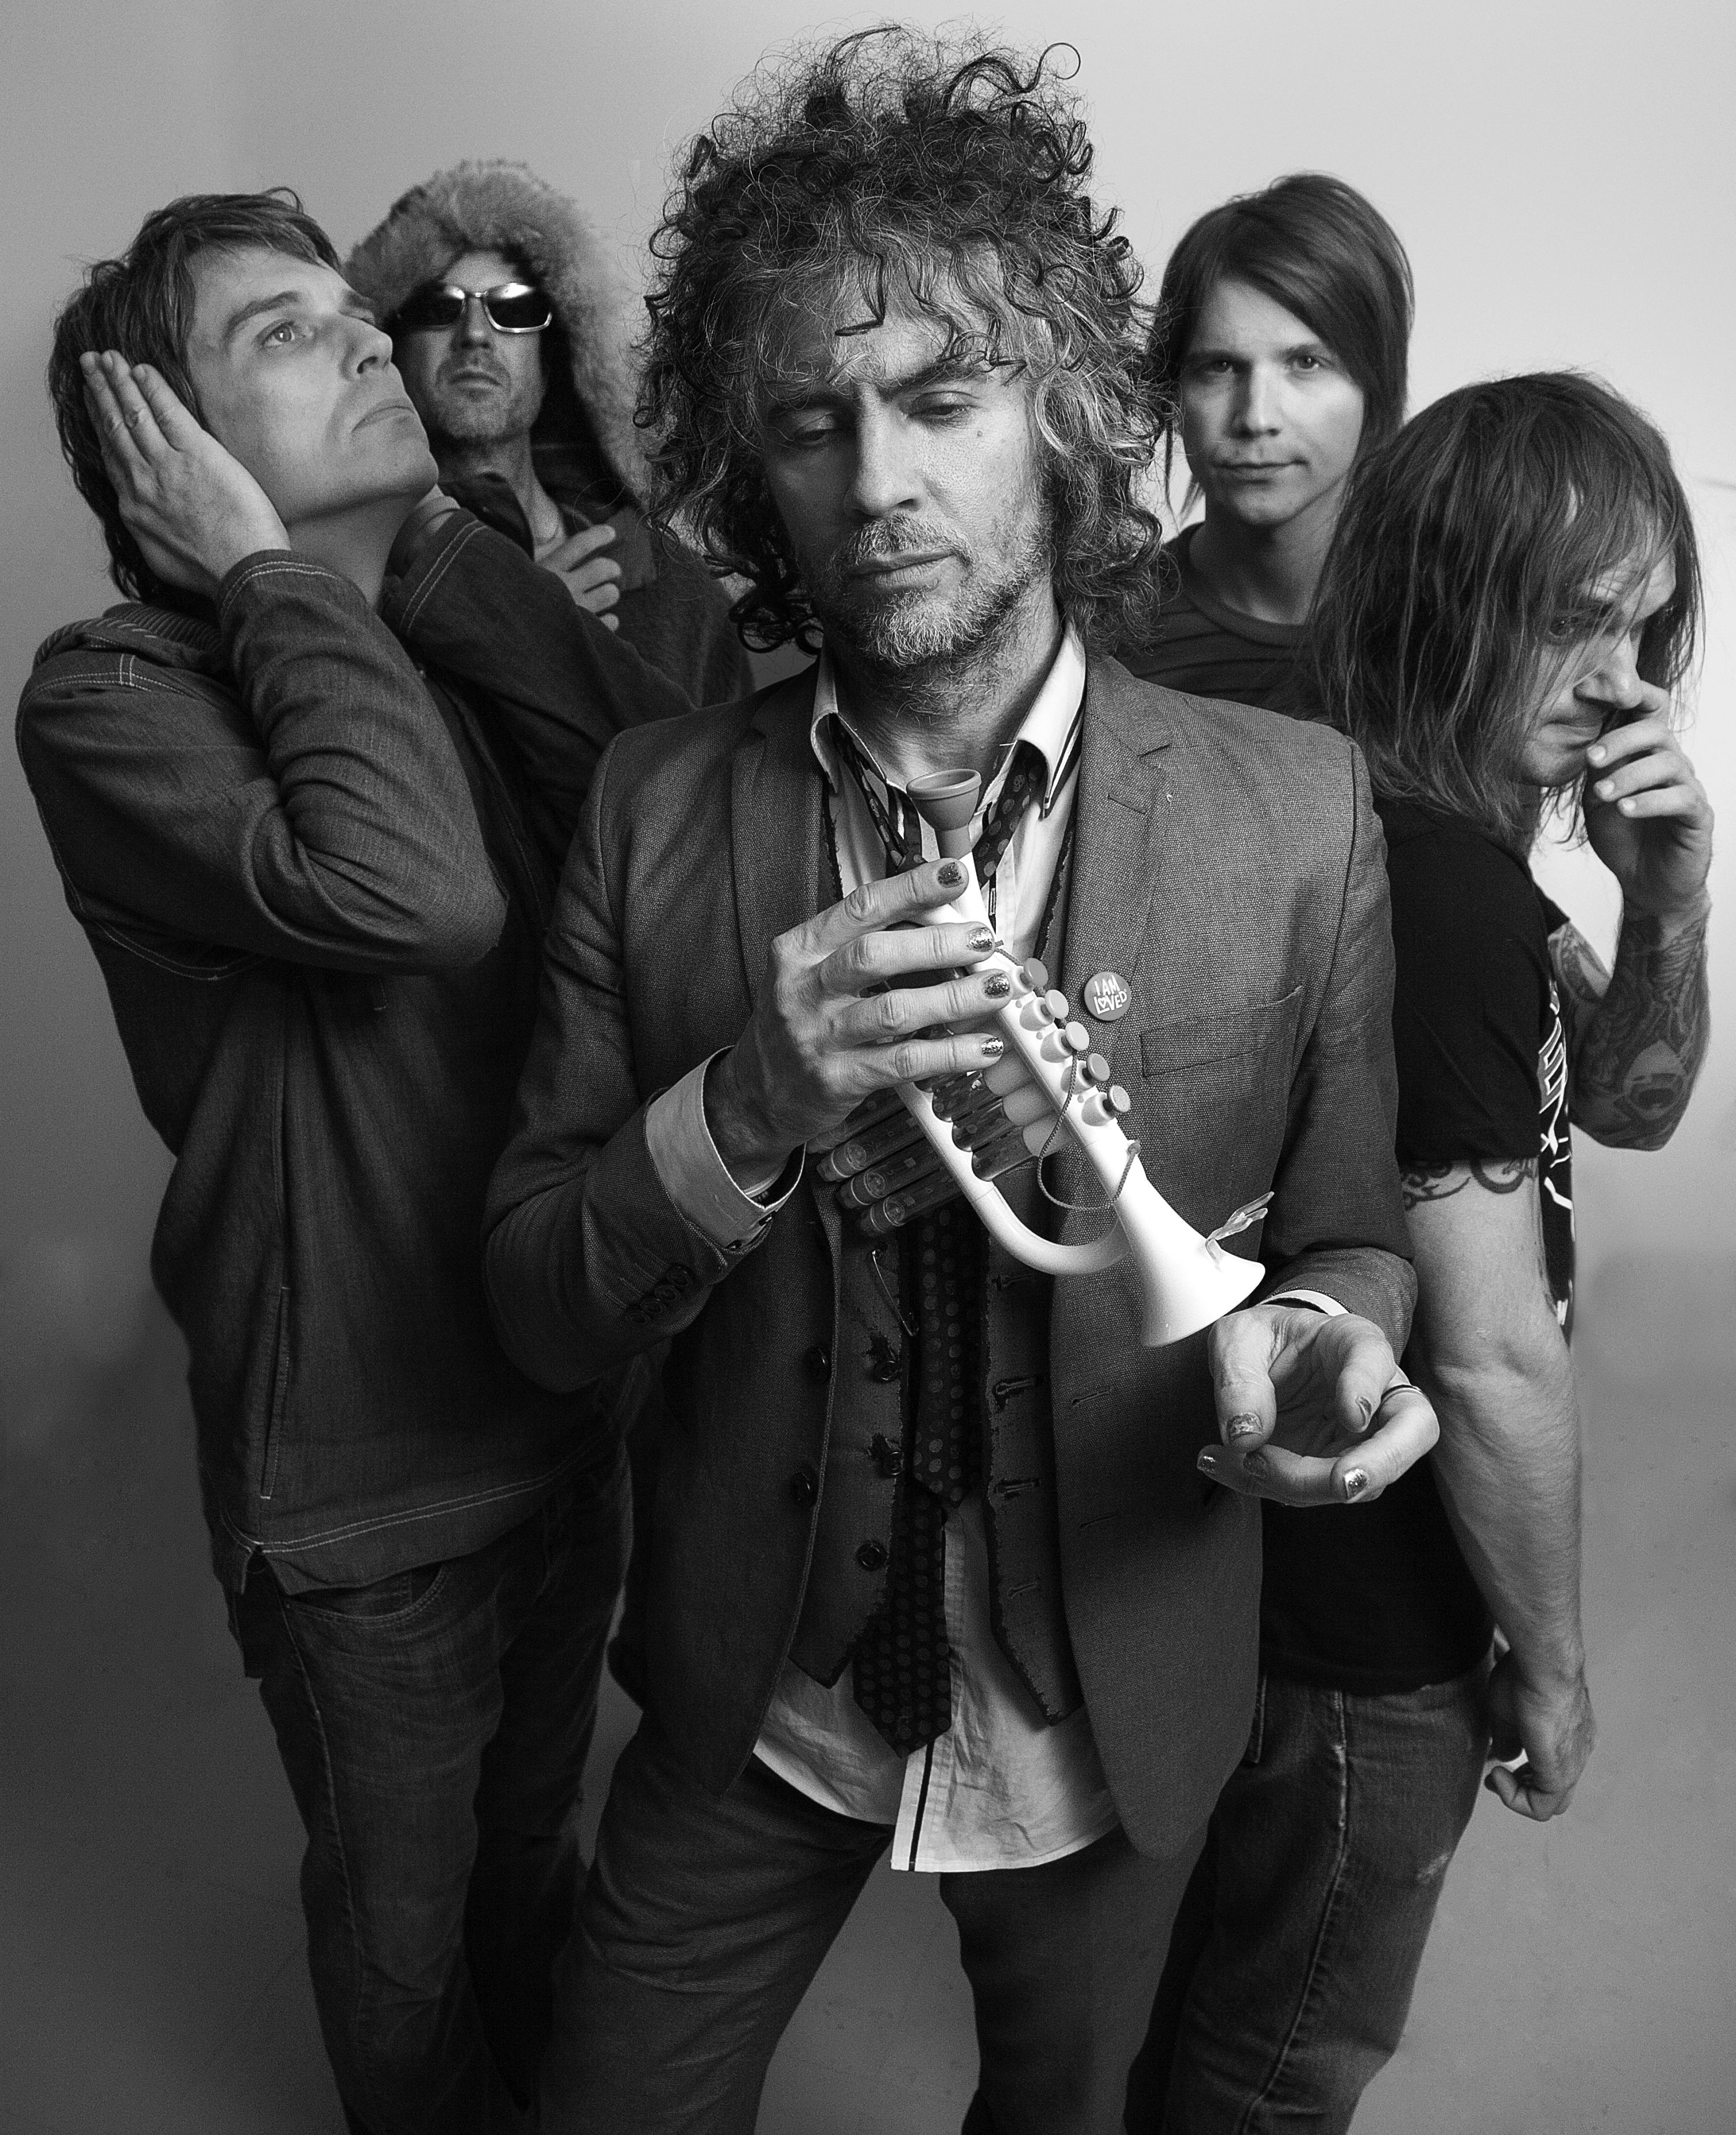 The Flaming Lips headline the Capitol Hill Block Party, July 26 to 28, alongside Pickwick, Girl Talk, and many other bands.